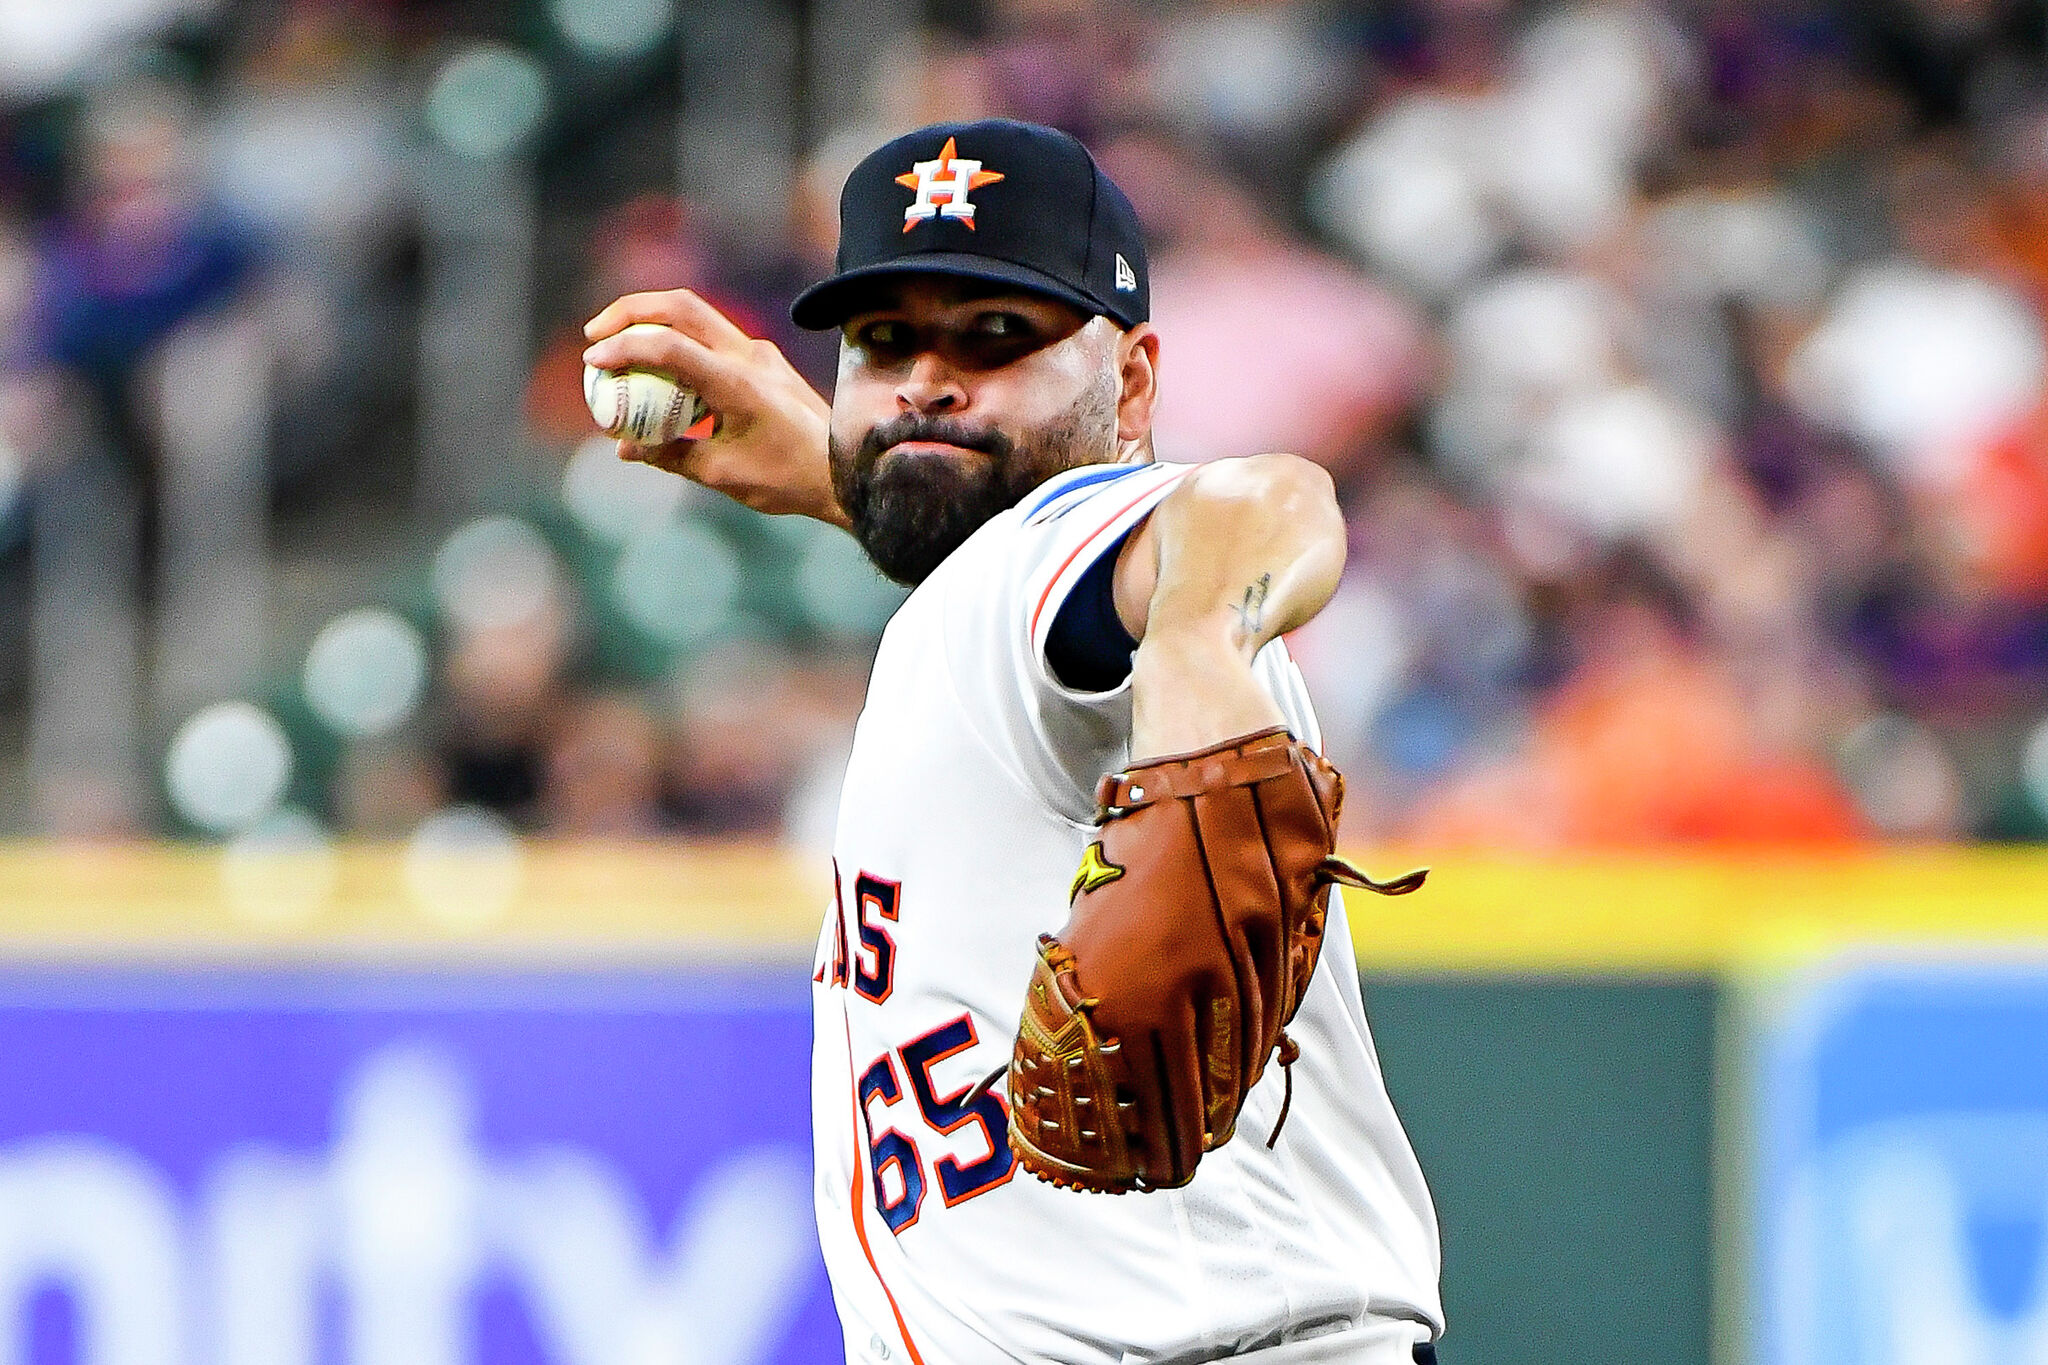 HOUSTON, TX - MAY 22: Houston Astros starting pitcher Jose Urquidy (65)  throws the ball to first base in the top of the first inning during the  baseball game between the Texas